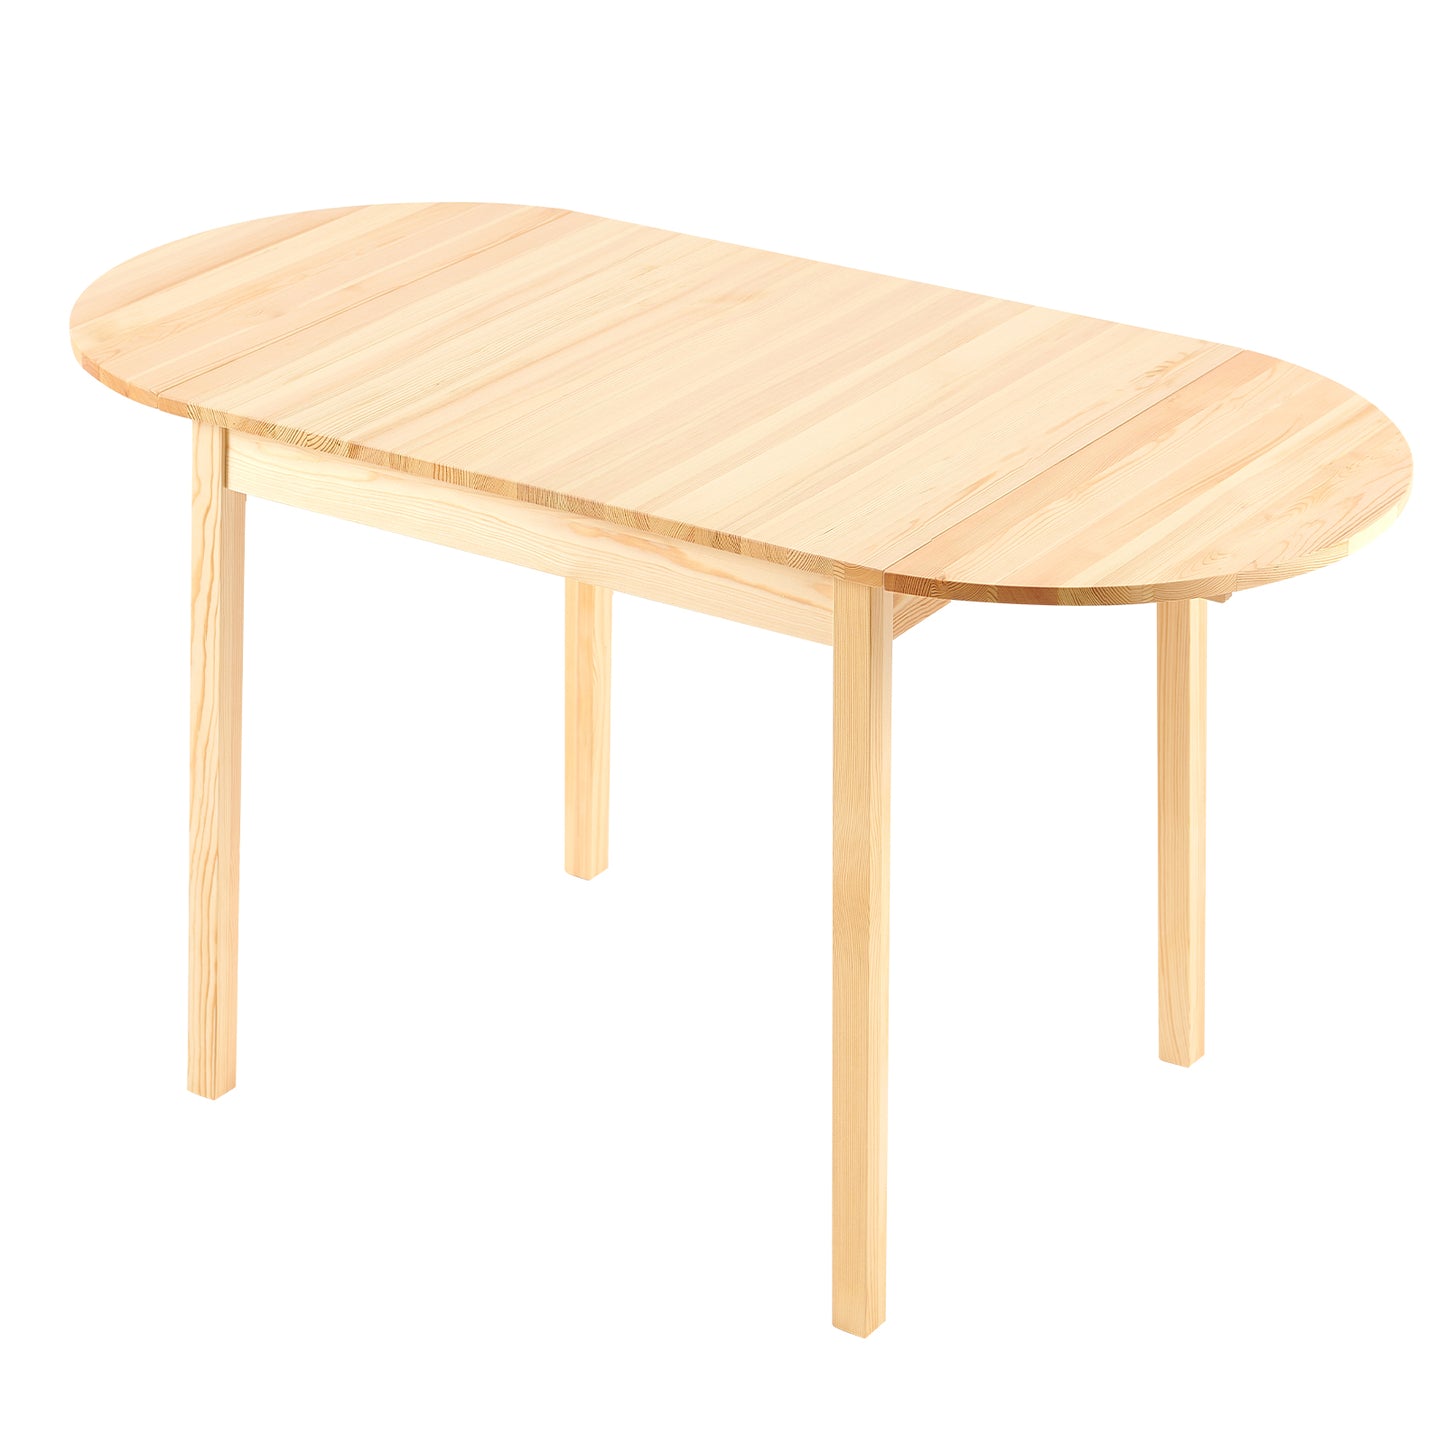 RUFF 80-140cm Dining Table With Pine Legs-WOOD